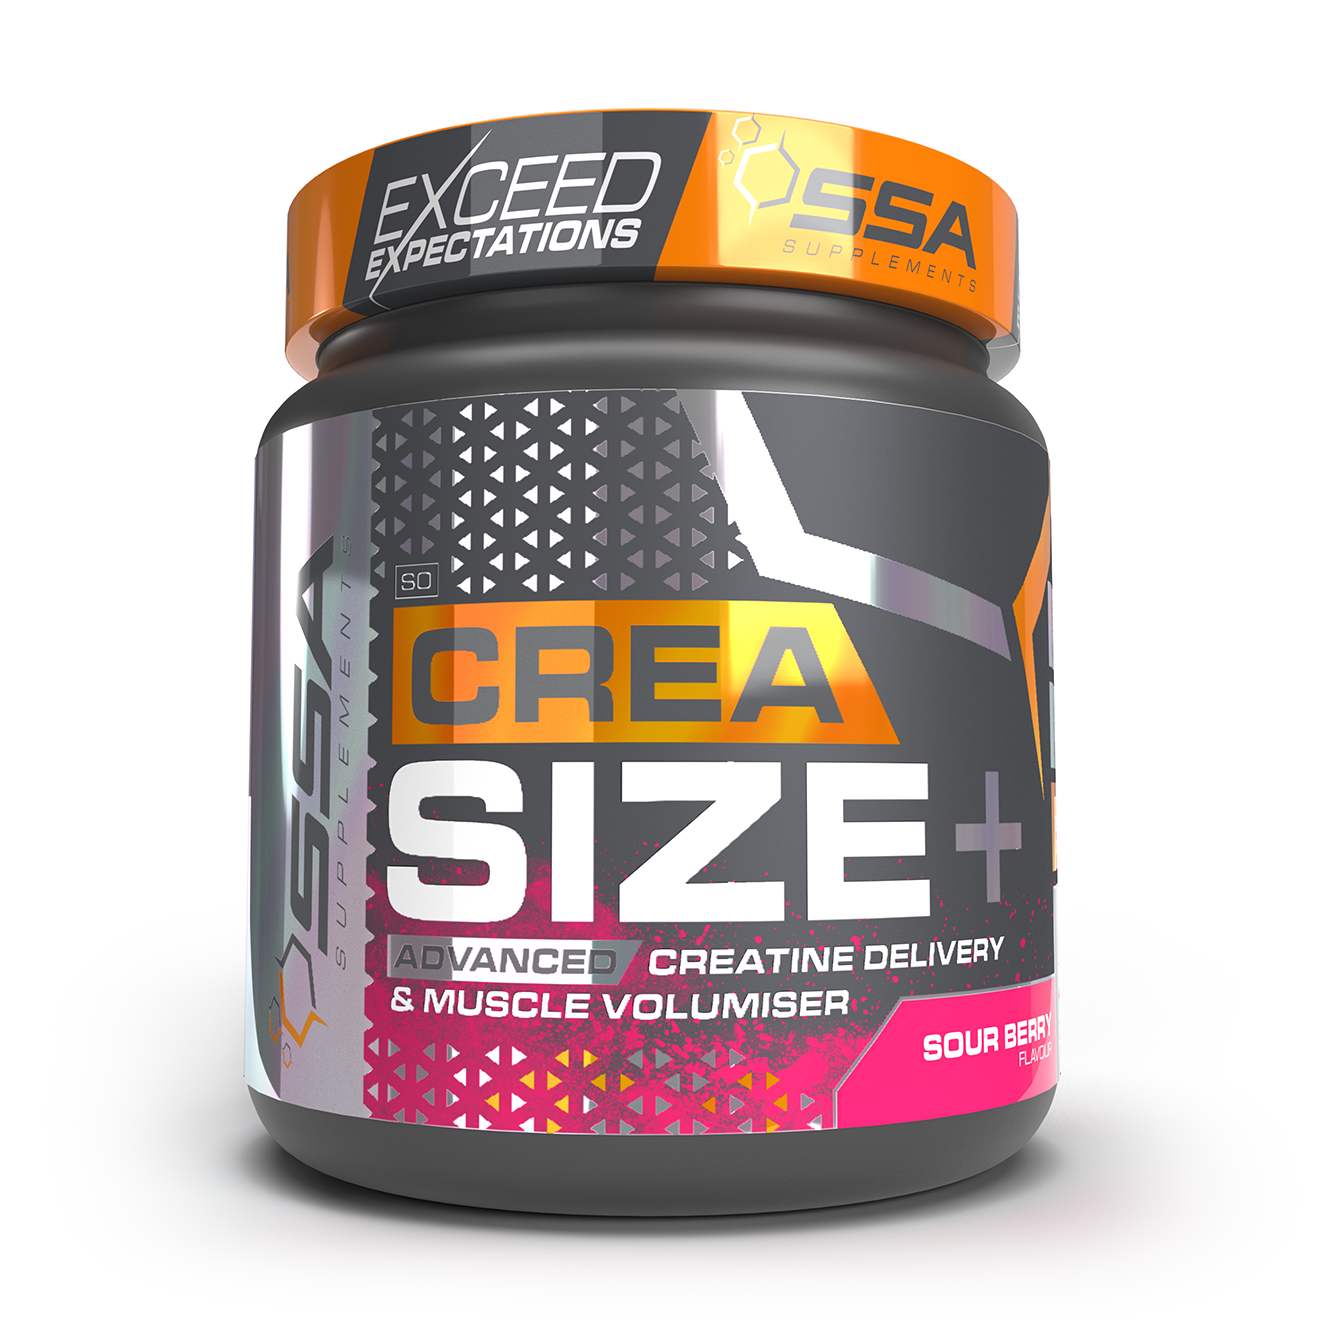 SSA CREA SIZE+: The Ultimate Creatine Powerhouse for Enhanced Performance and Gains.